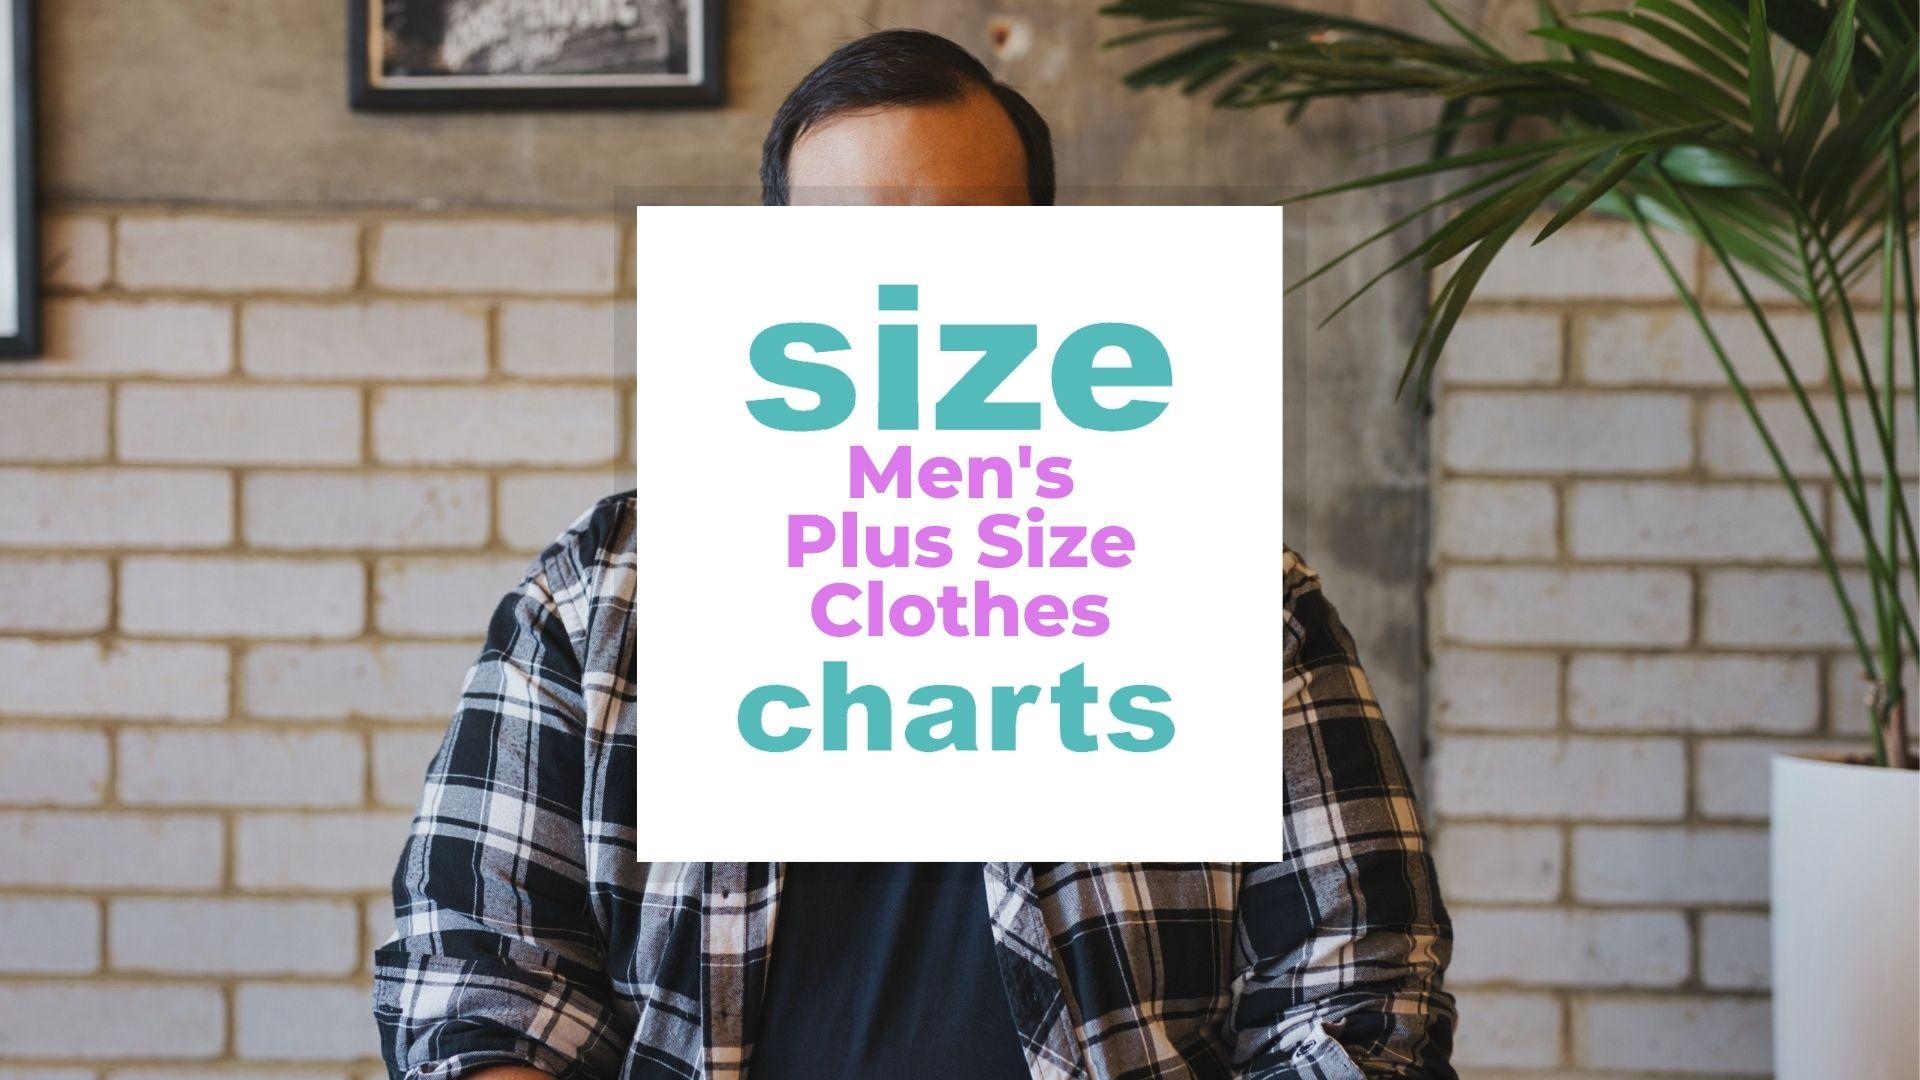 Men's Plus Size Clothes Size Chart and Fitting Guide